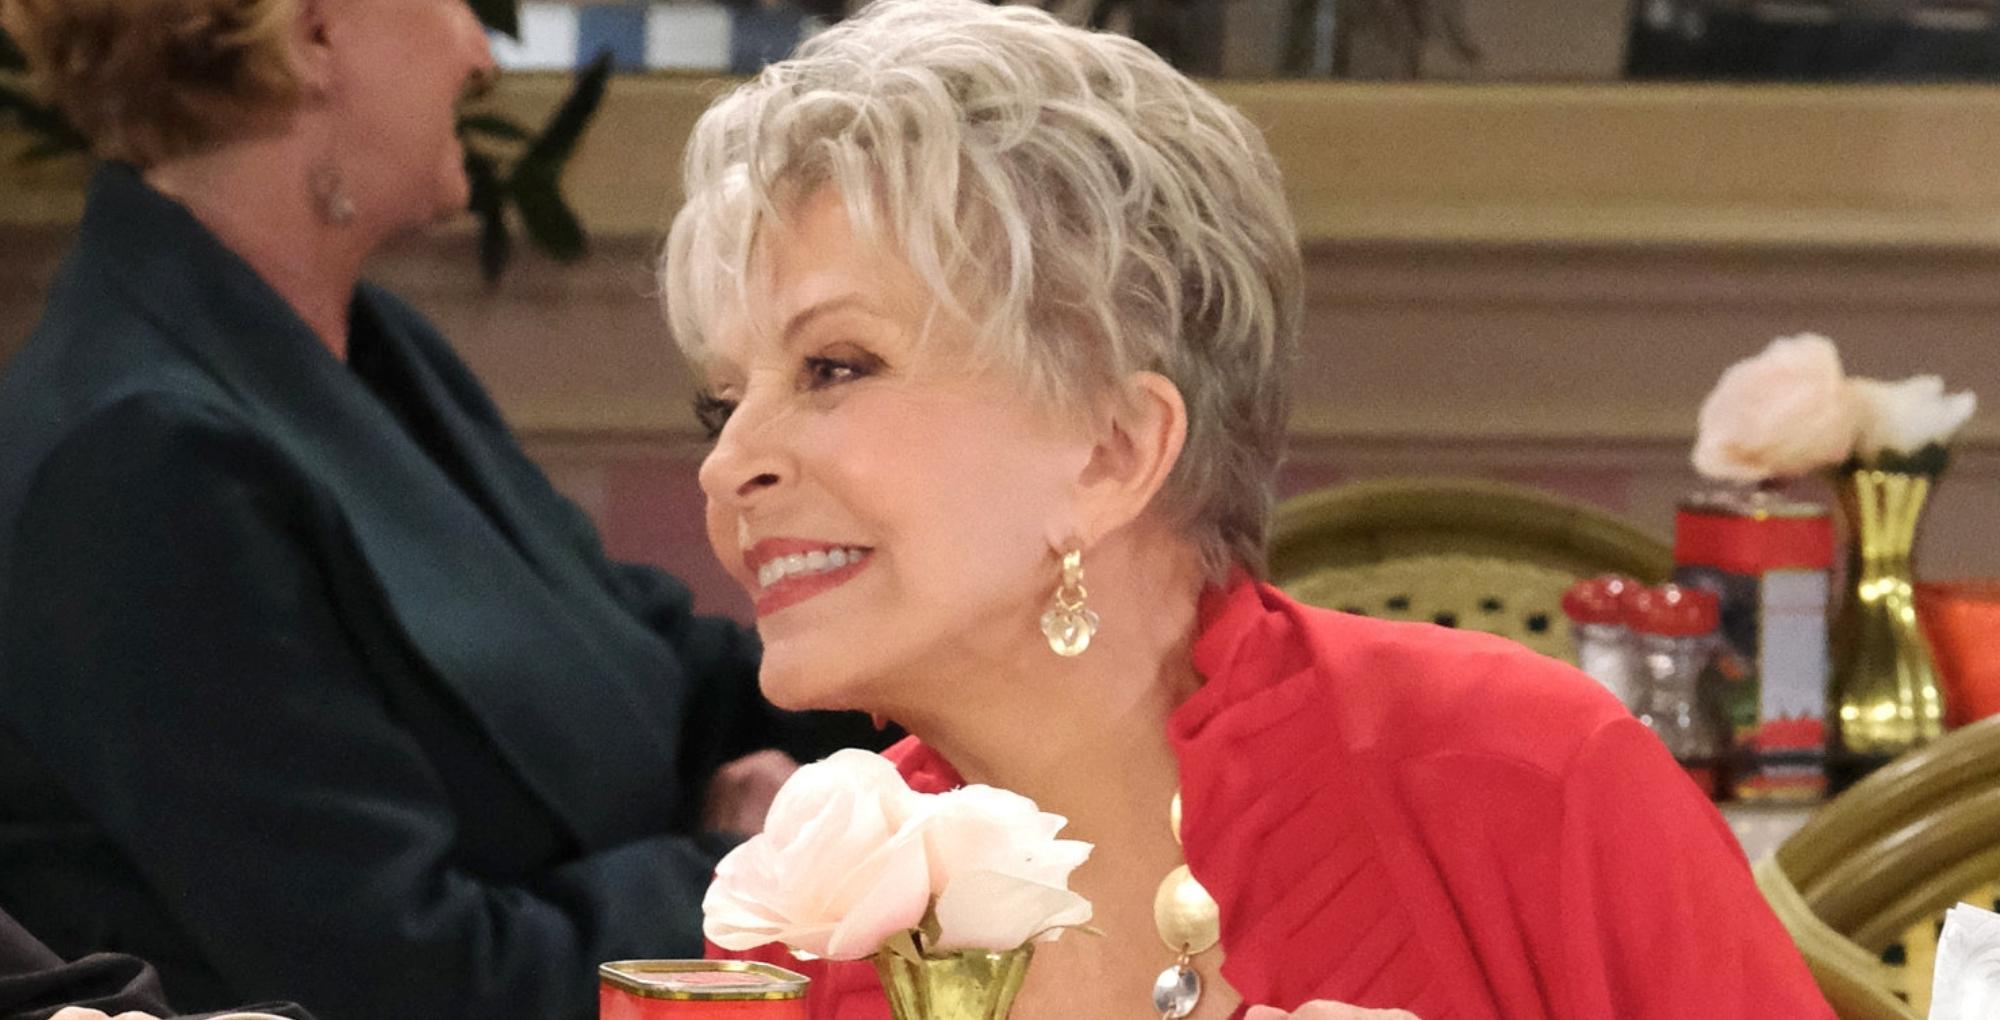 days of our lives spoilers for june 7, 2023, have julie williams smiling.